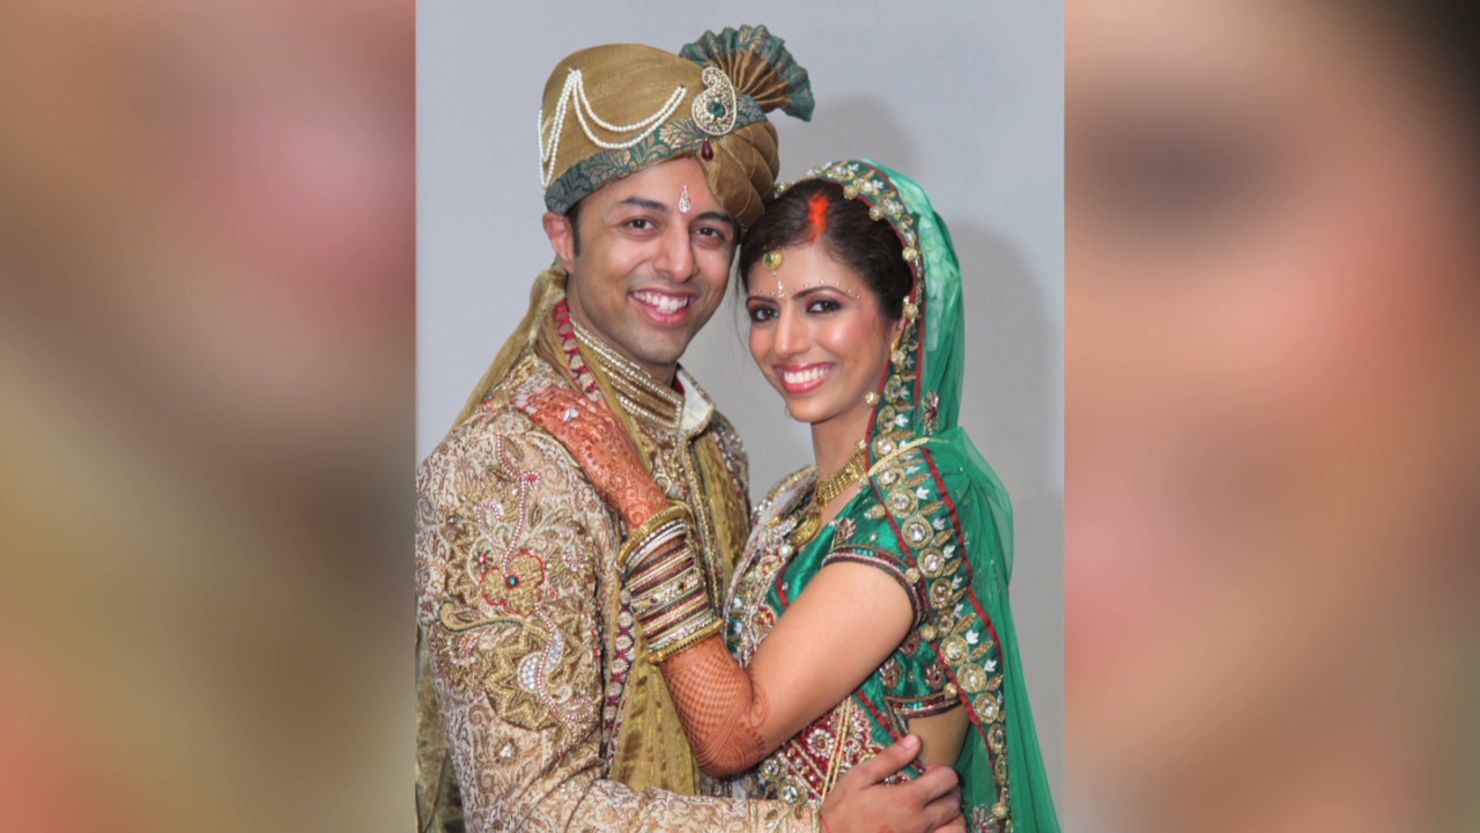 Shrien Dewani, left, is accused of hiring hit men to kill his new bride in South Africa.